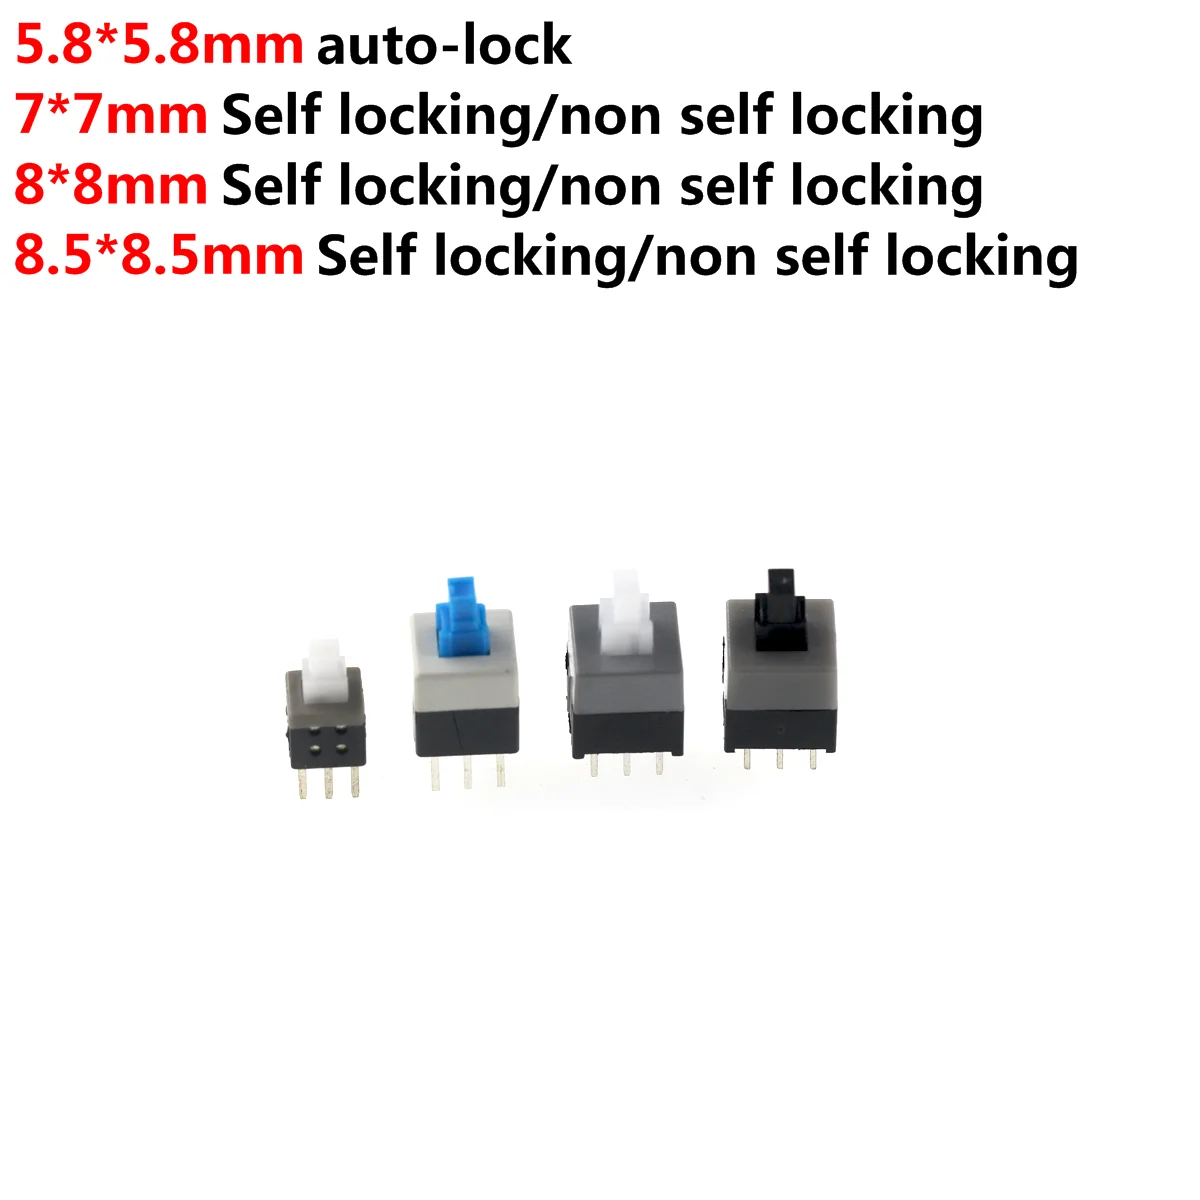 100PCS/LOT 5.8x5.8 7x7 8x8 8.5x8.5mm Self Locking / UNlock Push Tactile Power Micro Switch 6 Pin Button Switches auto bed leveling push pin needle self level sensor probe tips for bltouch dropshipping